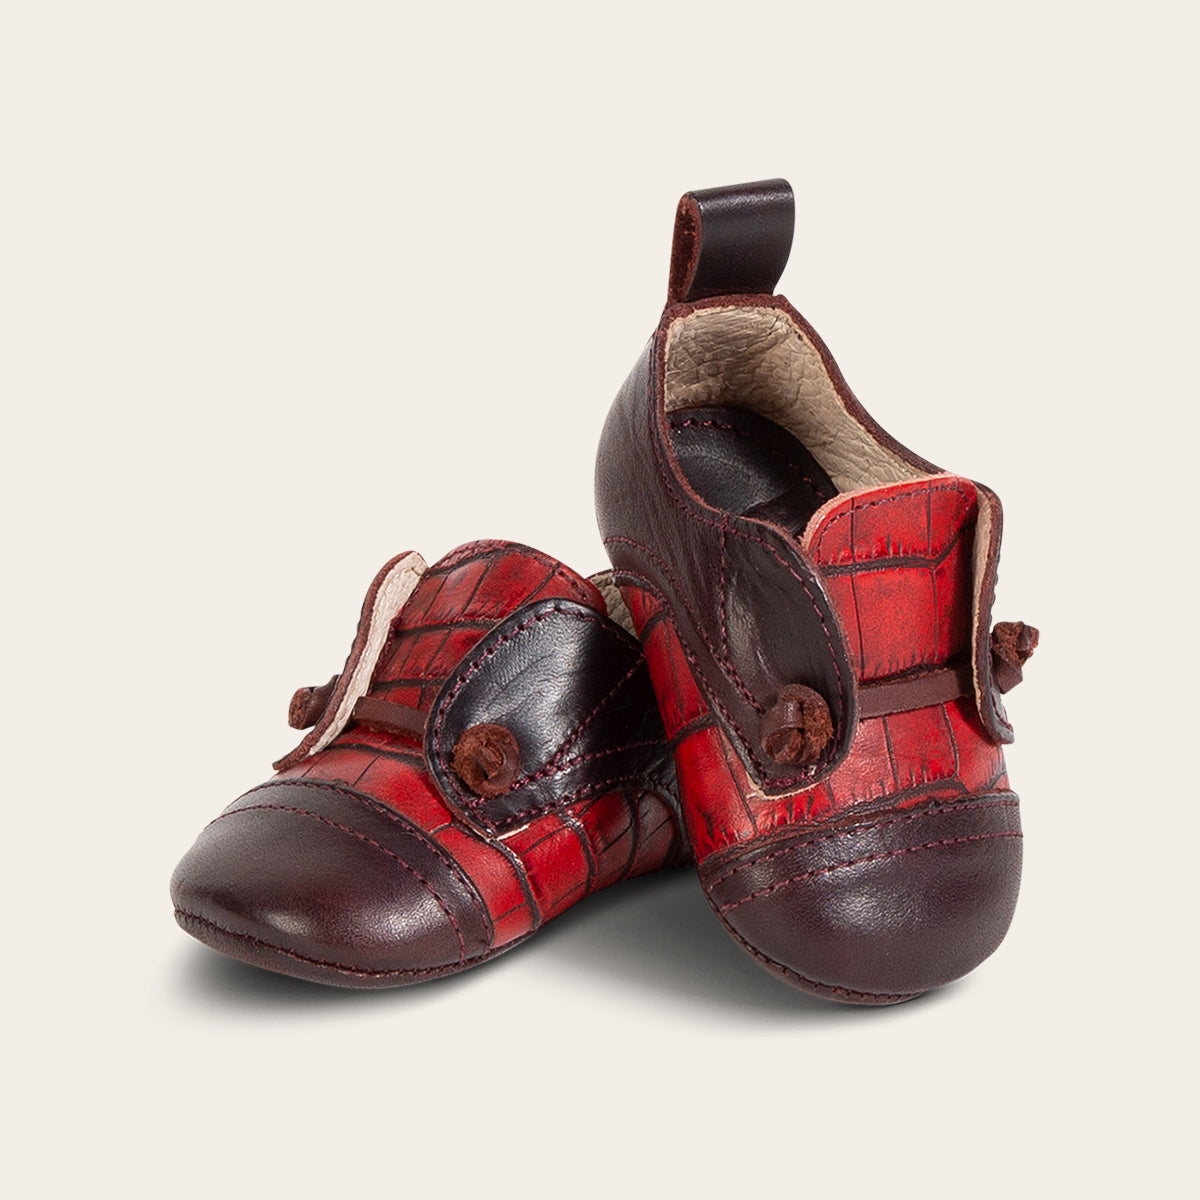 front view showing contrasting decorative knotted leather lace on FREEBIRD infant baby mabel wine multi leather shoe